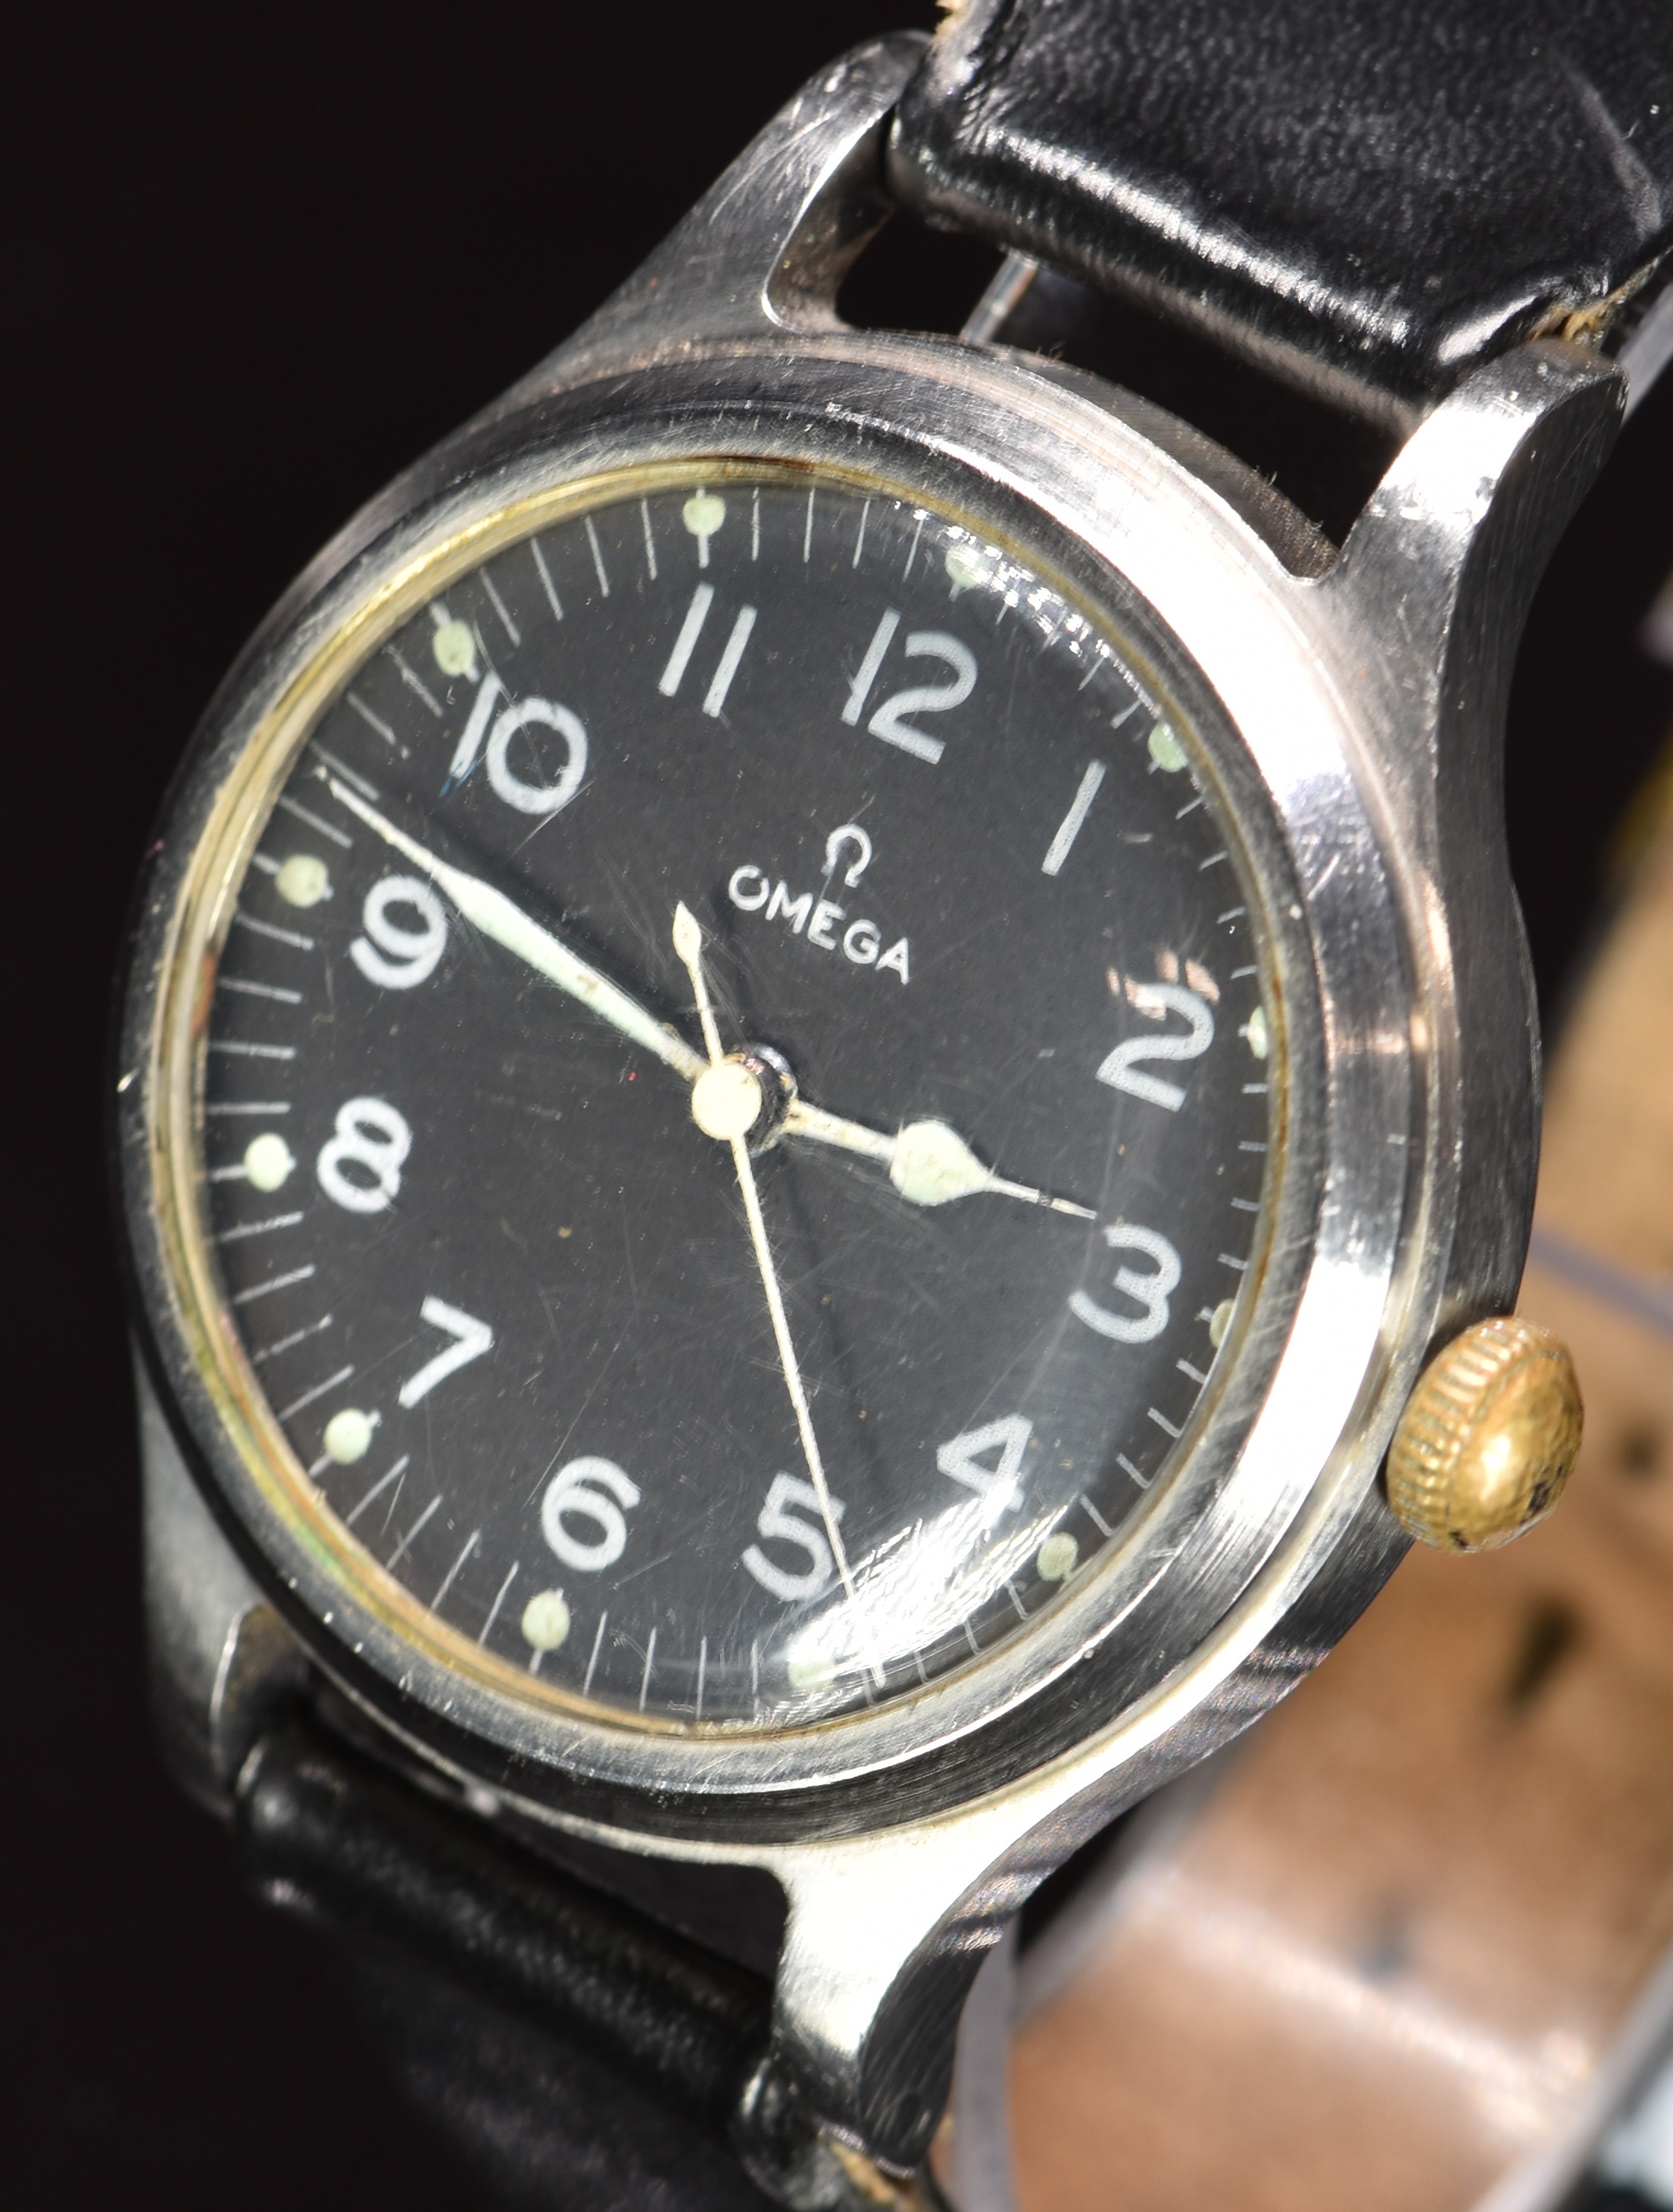 Omega British military issue wristwatch with luminous hands, white Arabic numerals, black dial, - Image 2 of 6